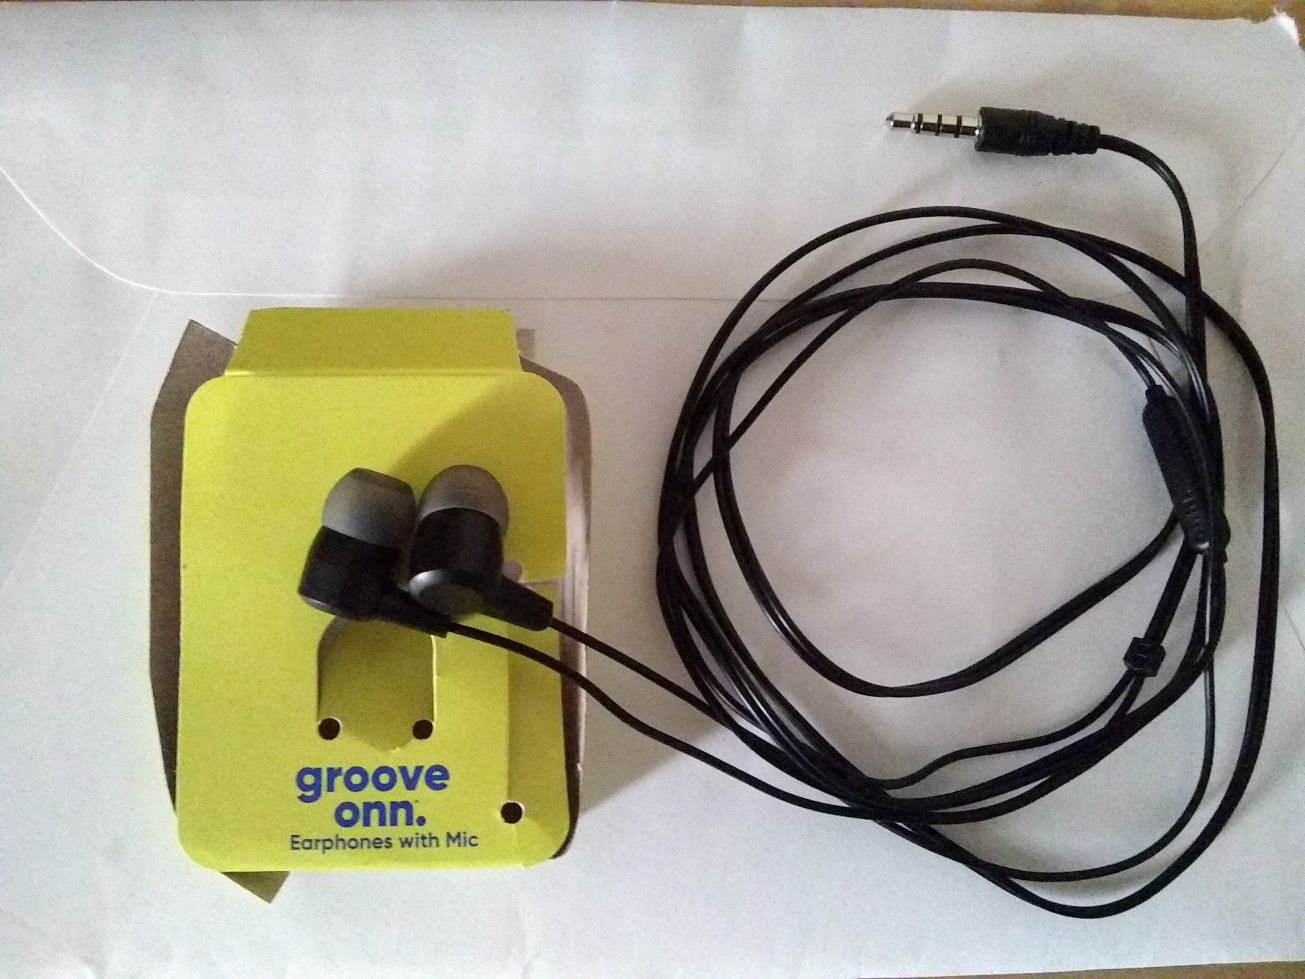 Groove Onn earphones with built-in mic from WalMart